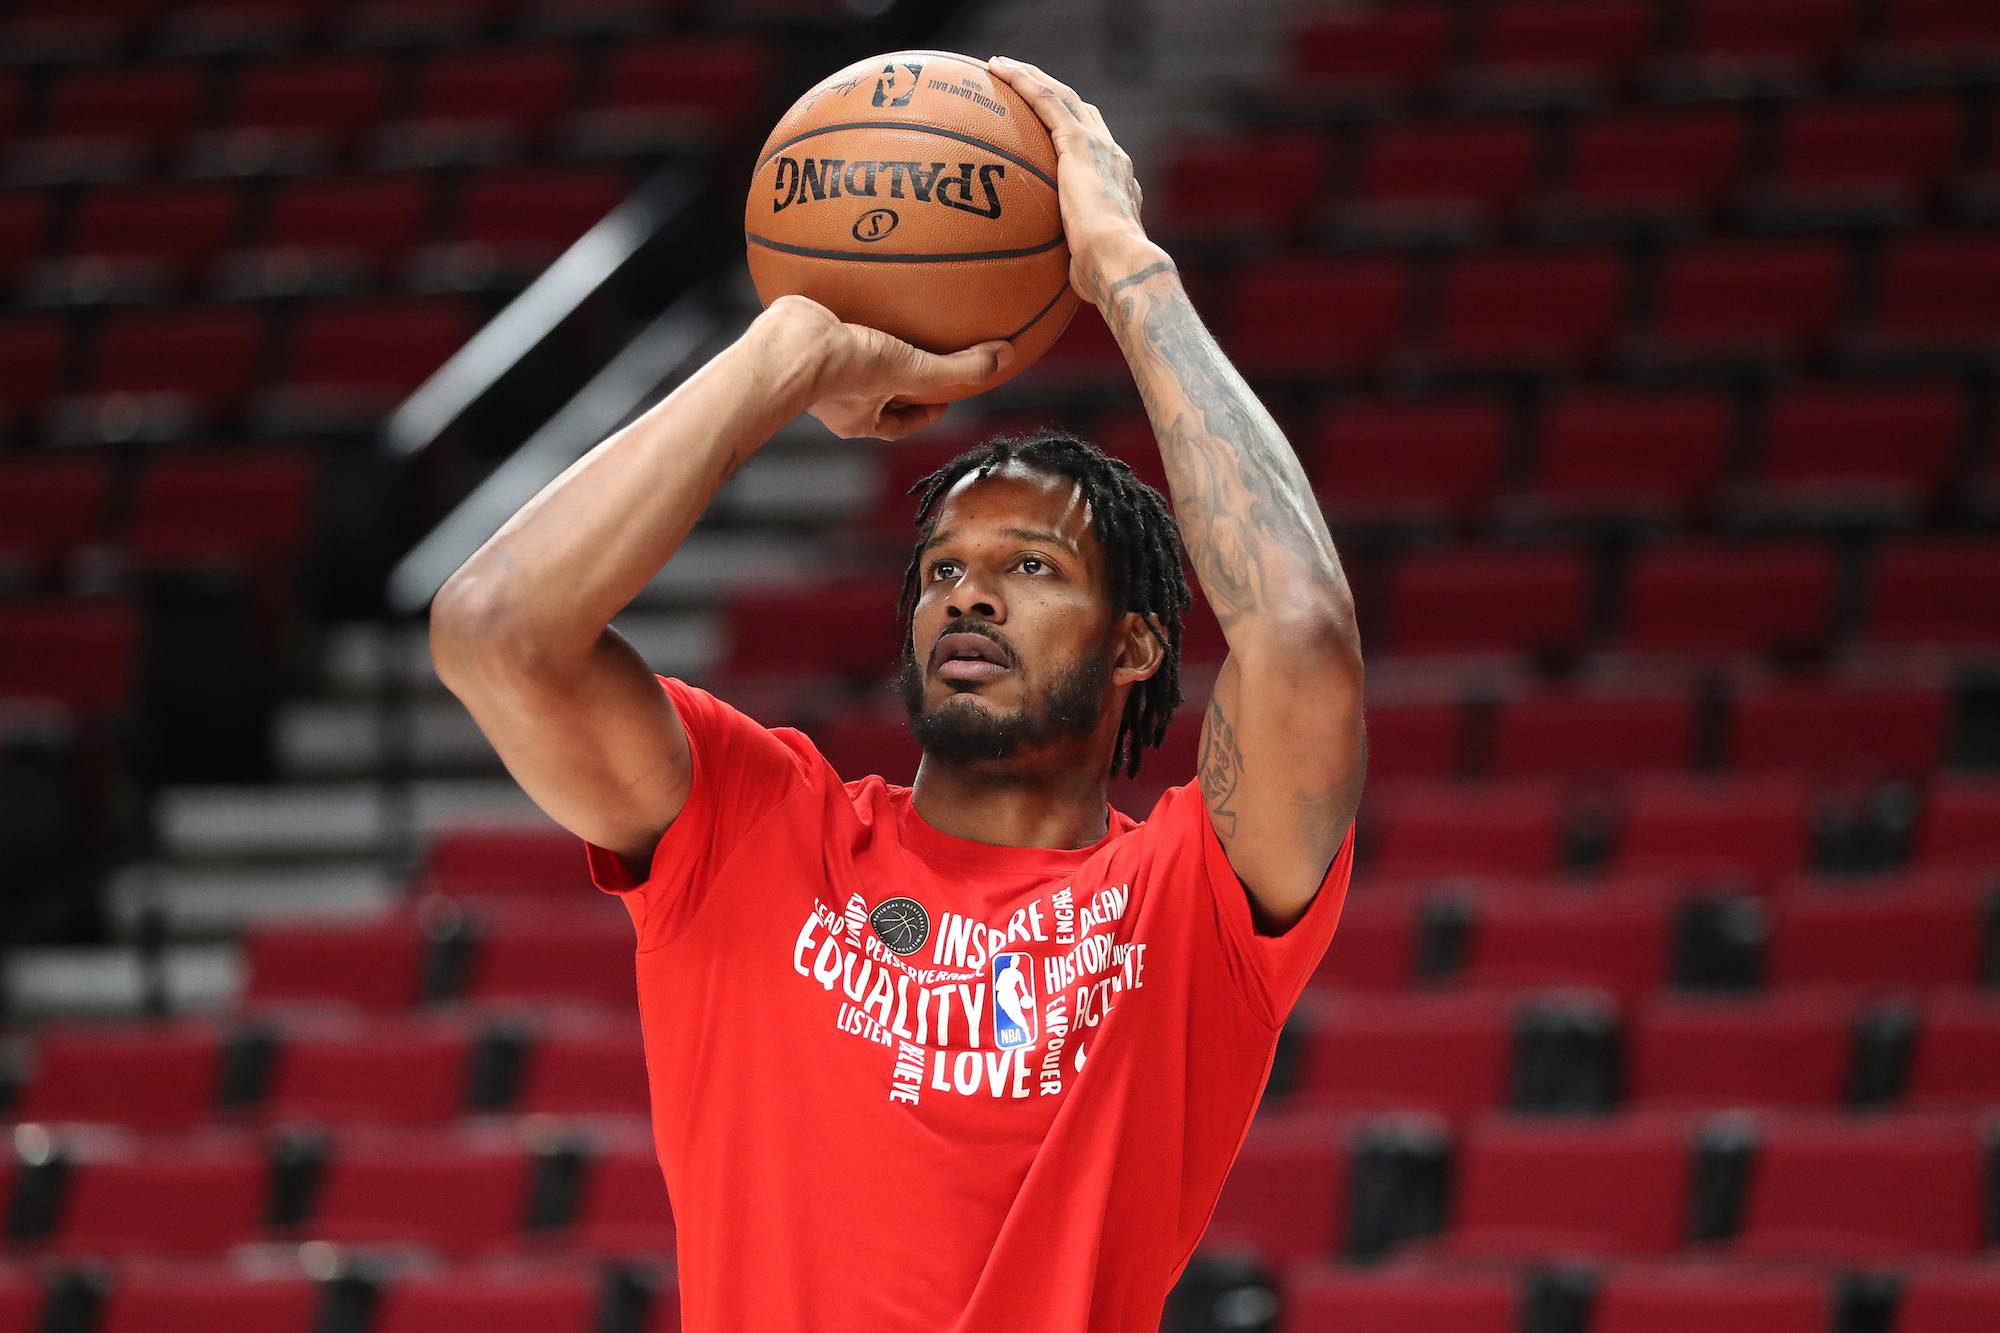 Trevor Ariza will be giving up a portion of his salary to spend time with his son.